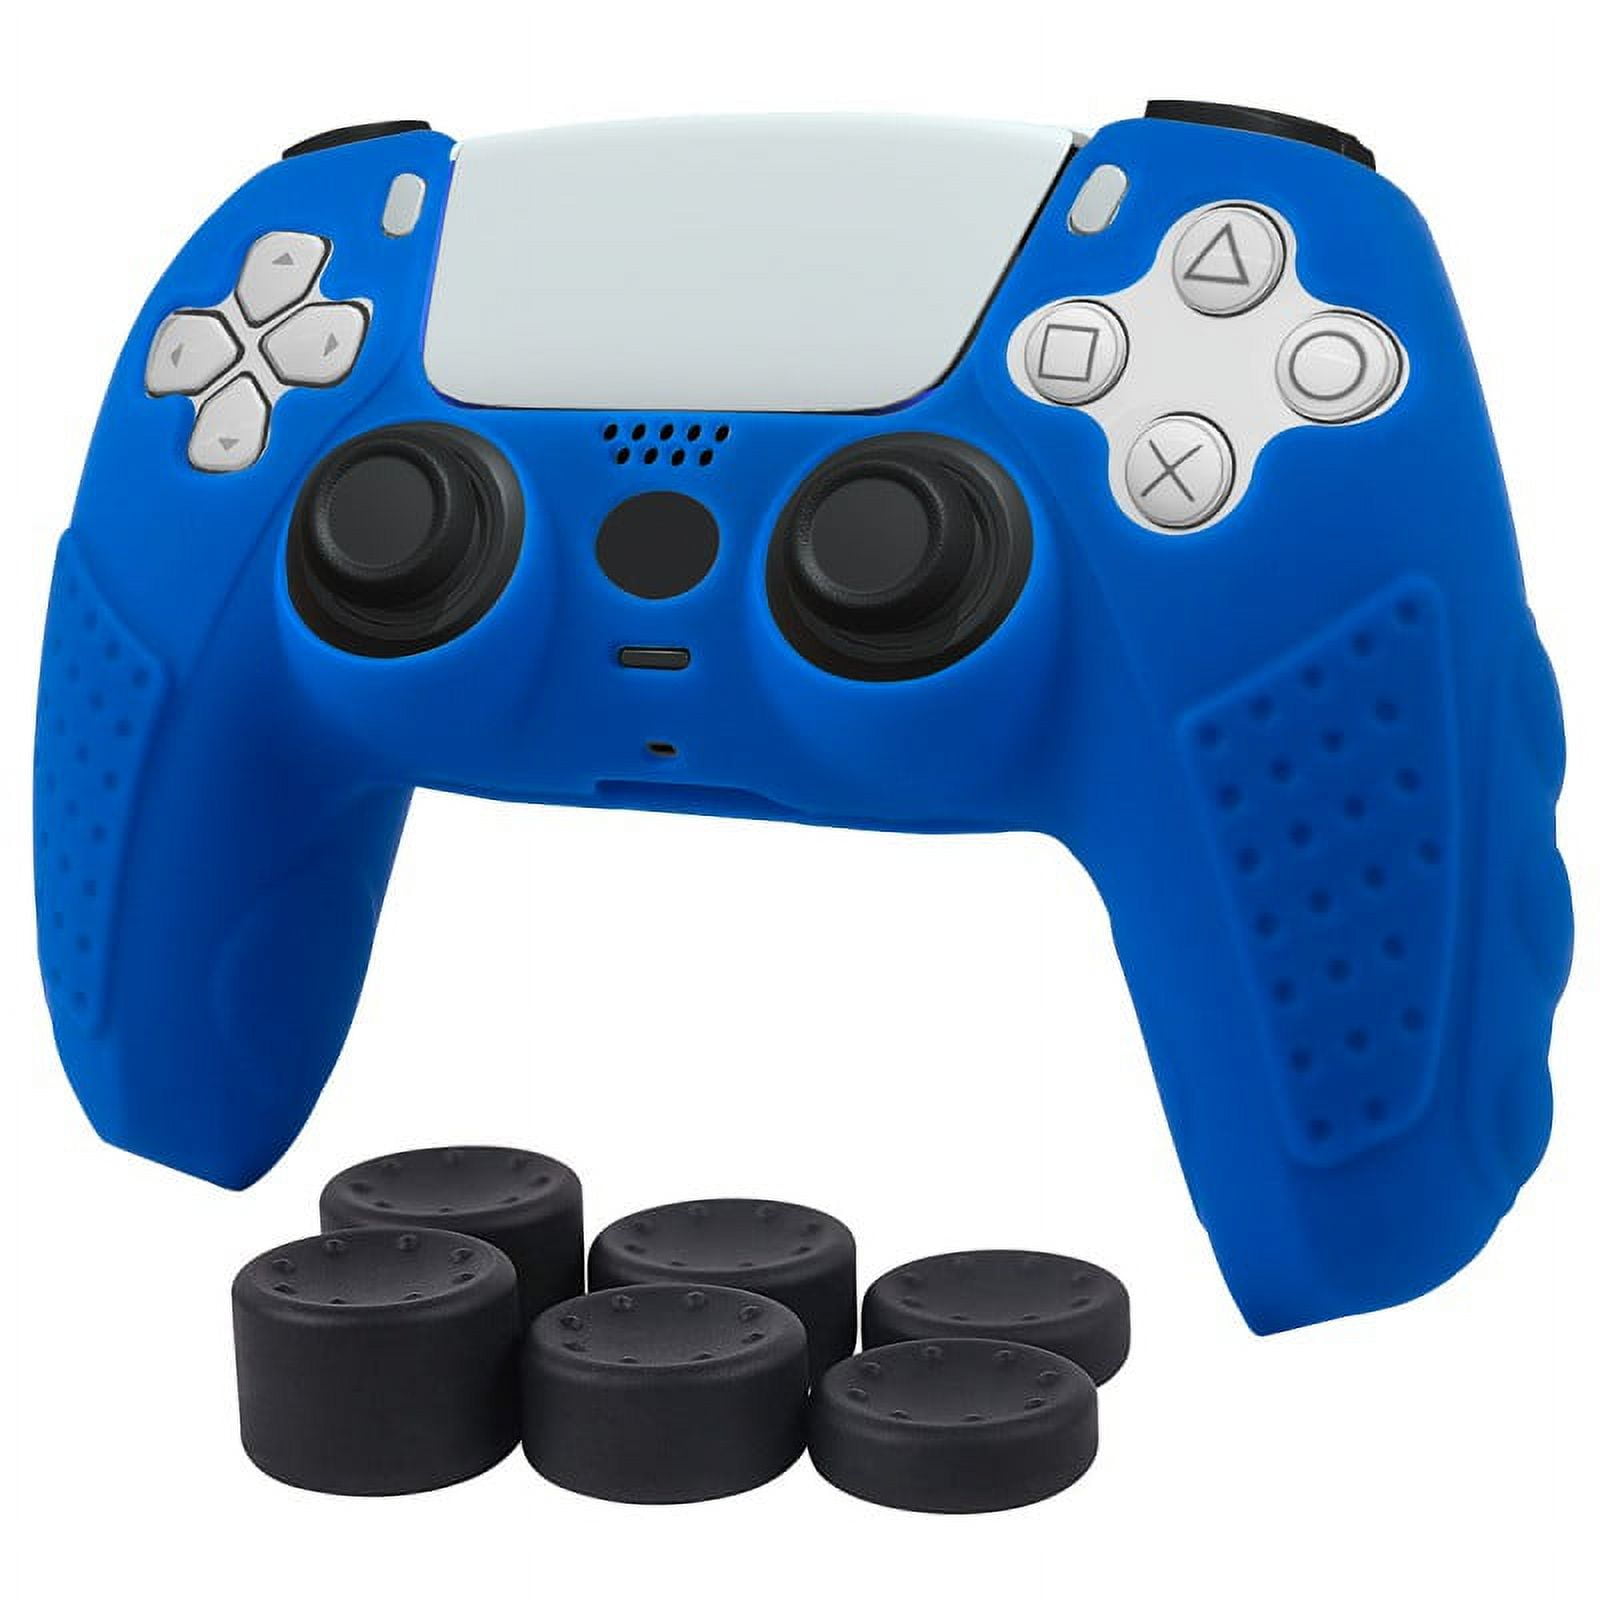 PS5 Controller Skin Anti-Slip Silicone Grip Cover Protector Rubber Case  Accessories Set for Playstation 5 Gamepad Joystick with 6 Thumb Grip Caps 